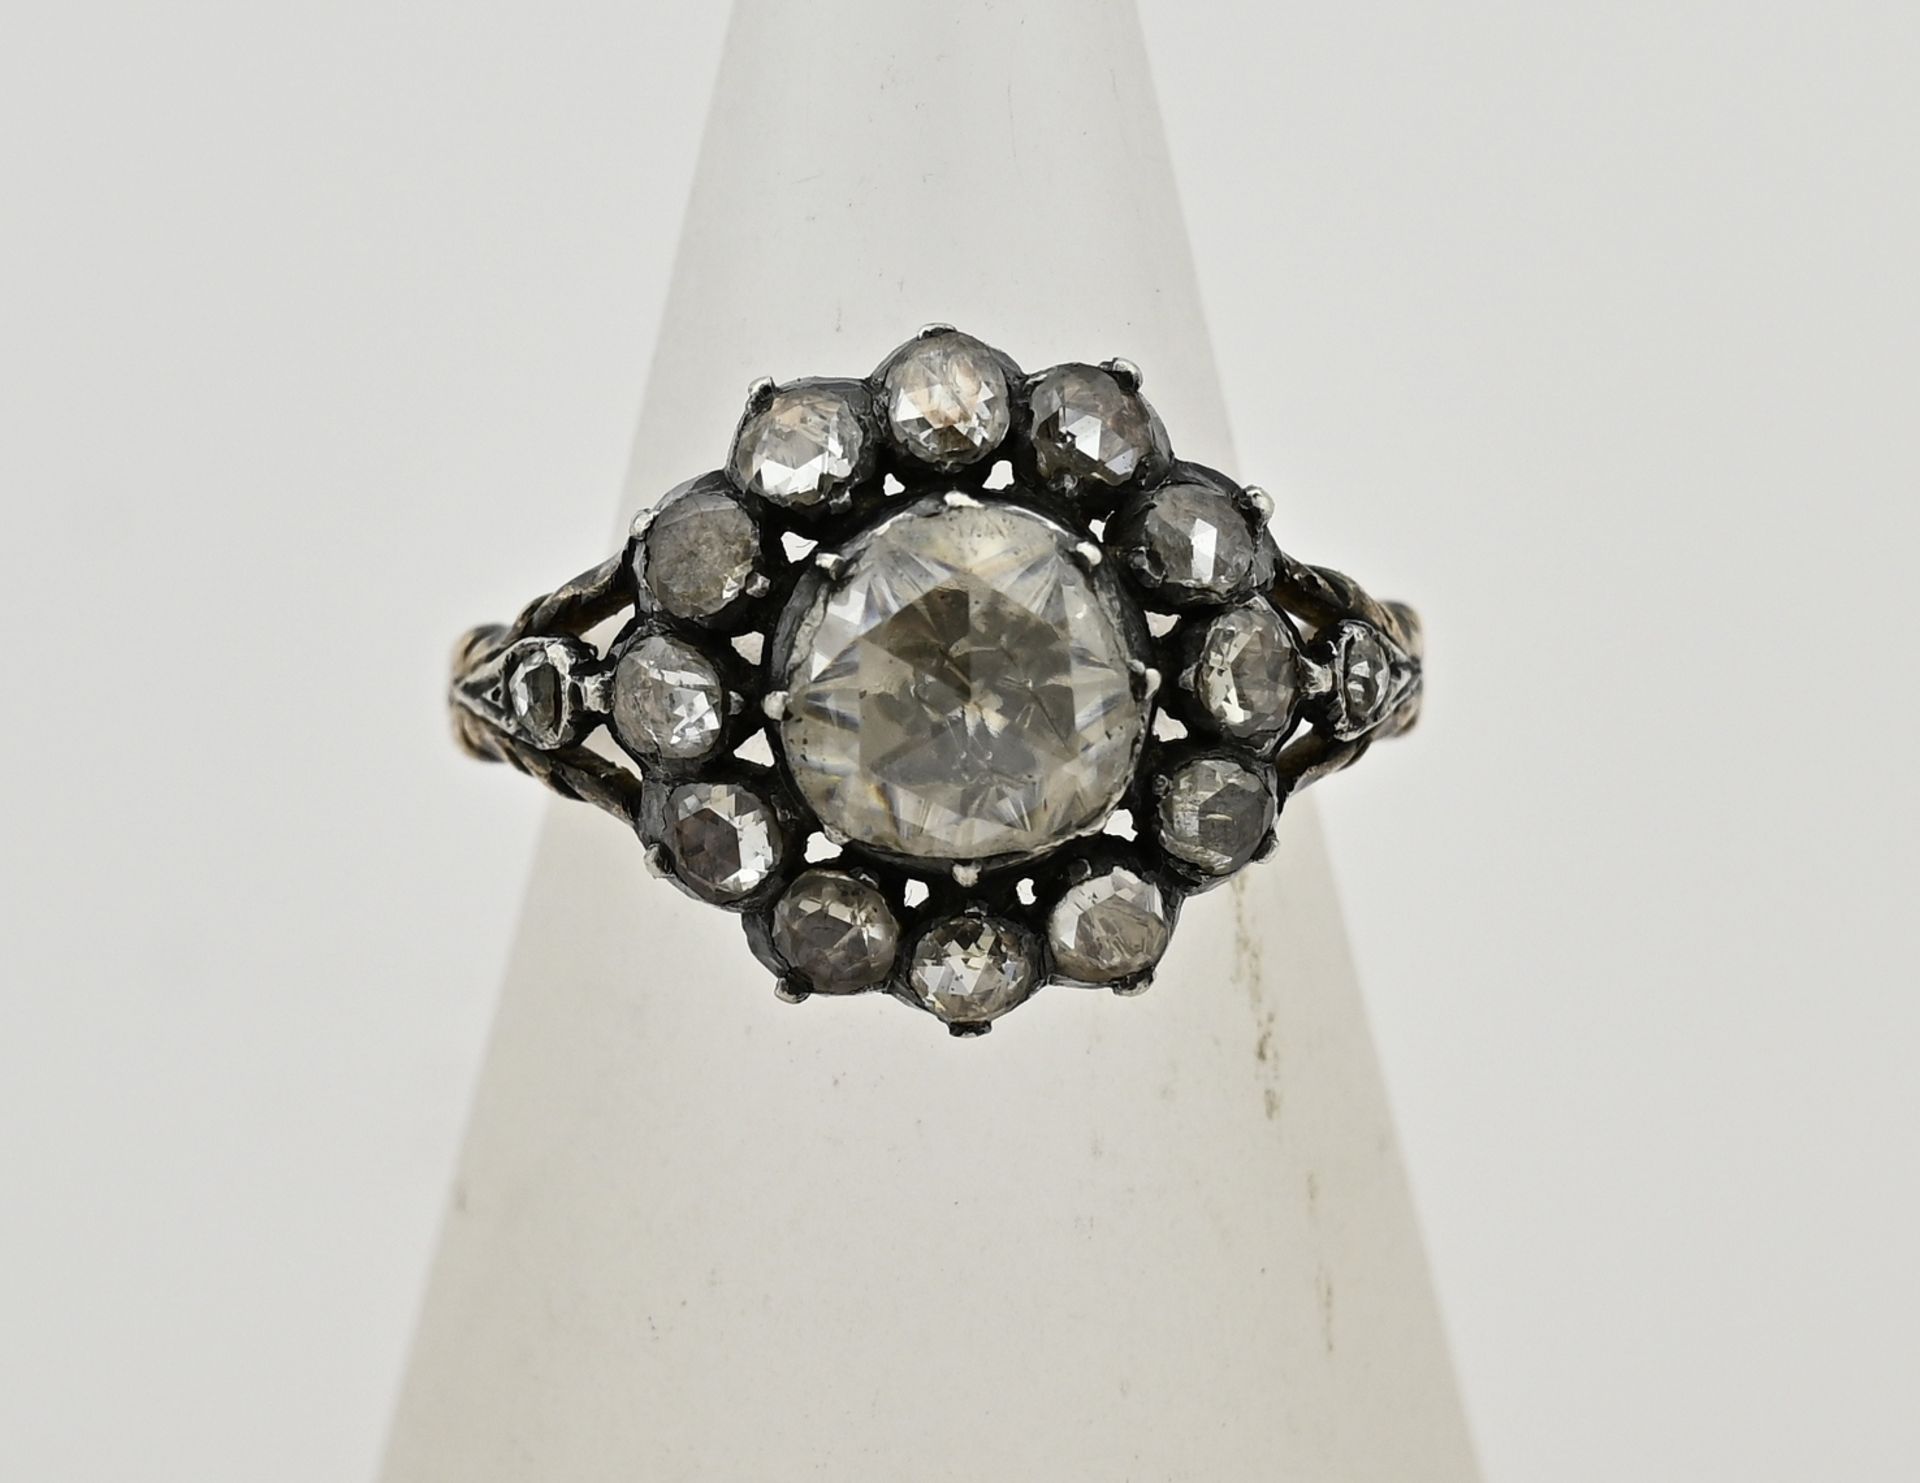 Gold ring with old diamond, rosette